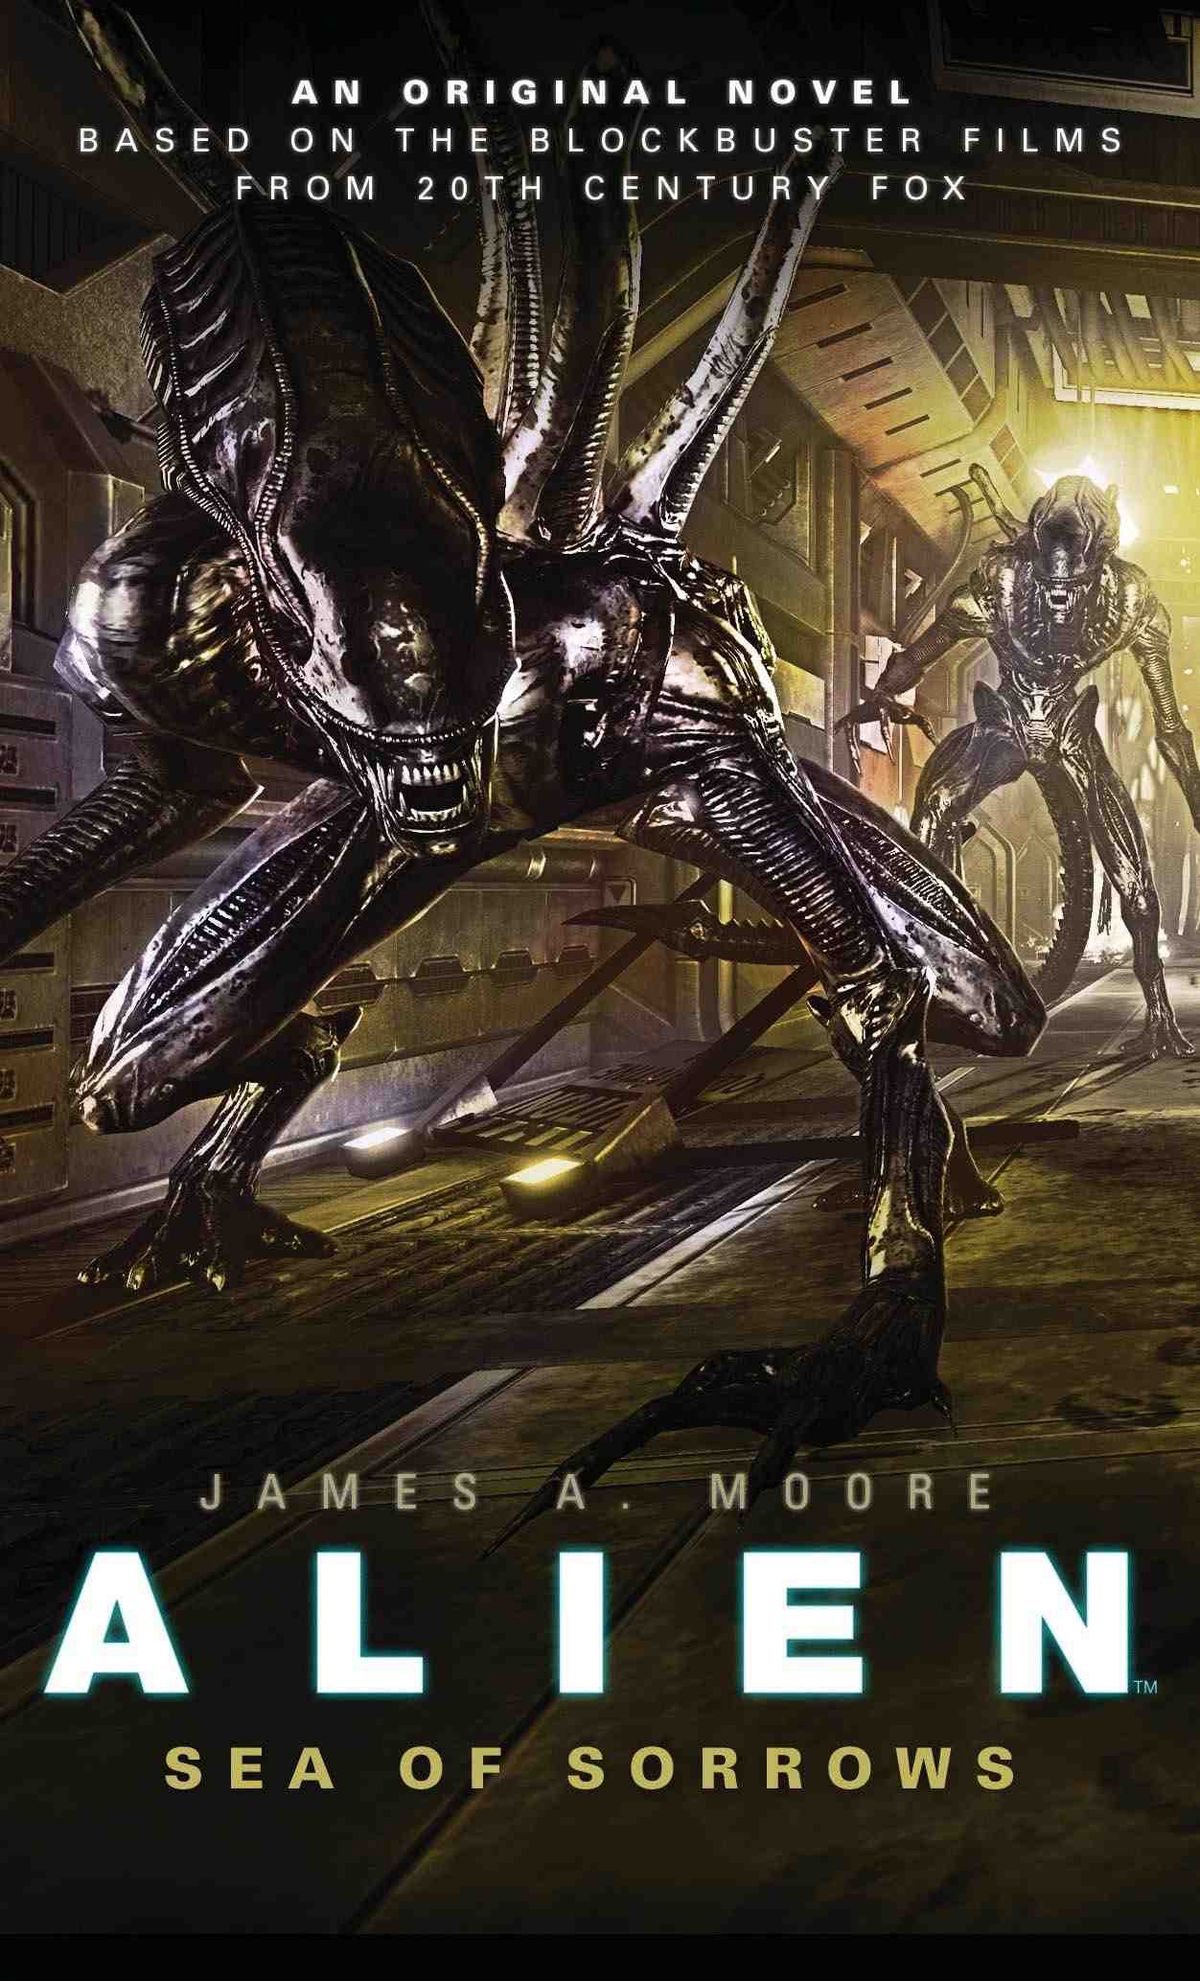 The cover of James A.Moore’s Alien: Sea of Sorrows, showing two Xenomorphs in a hallway